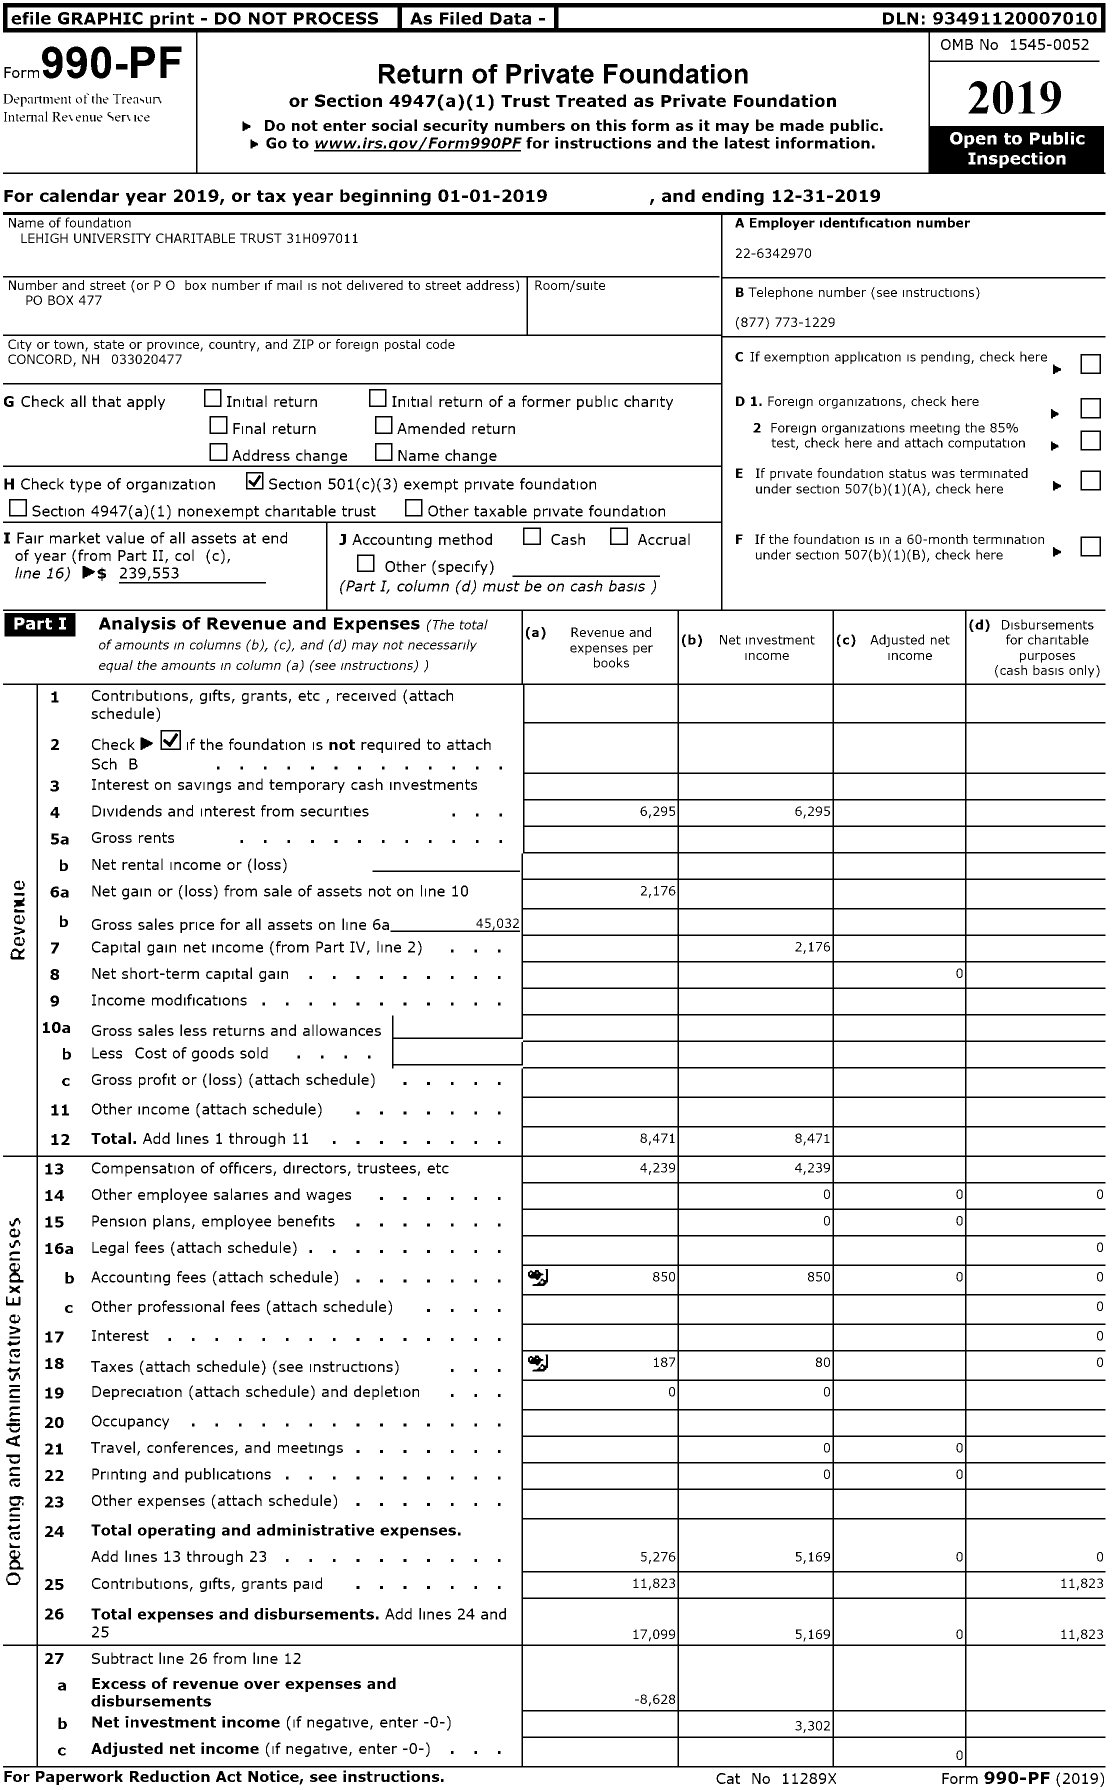 Image of first page of 2019 Form 990PR for Lehigh University Charitable Trust 31h097011